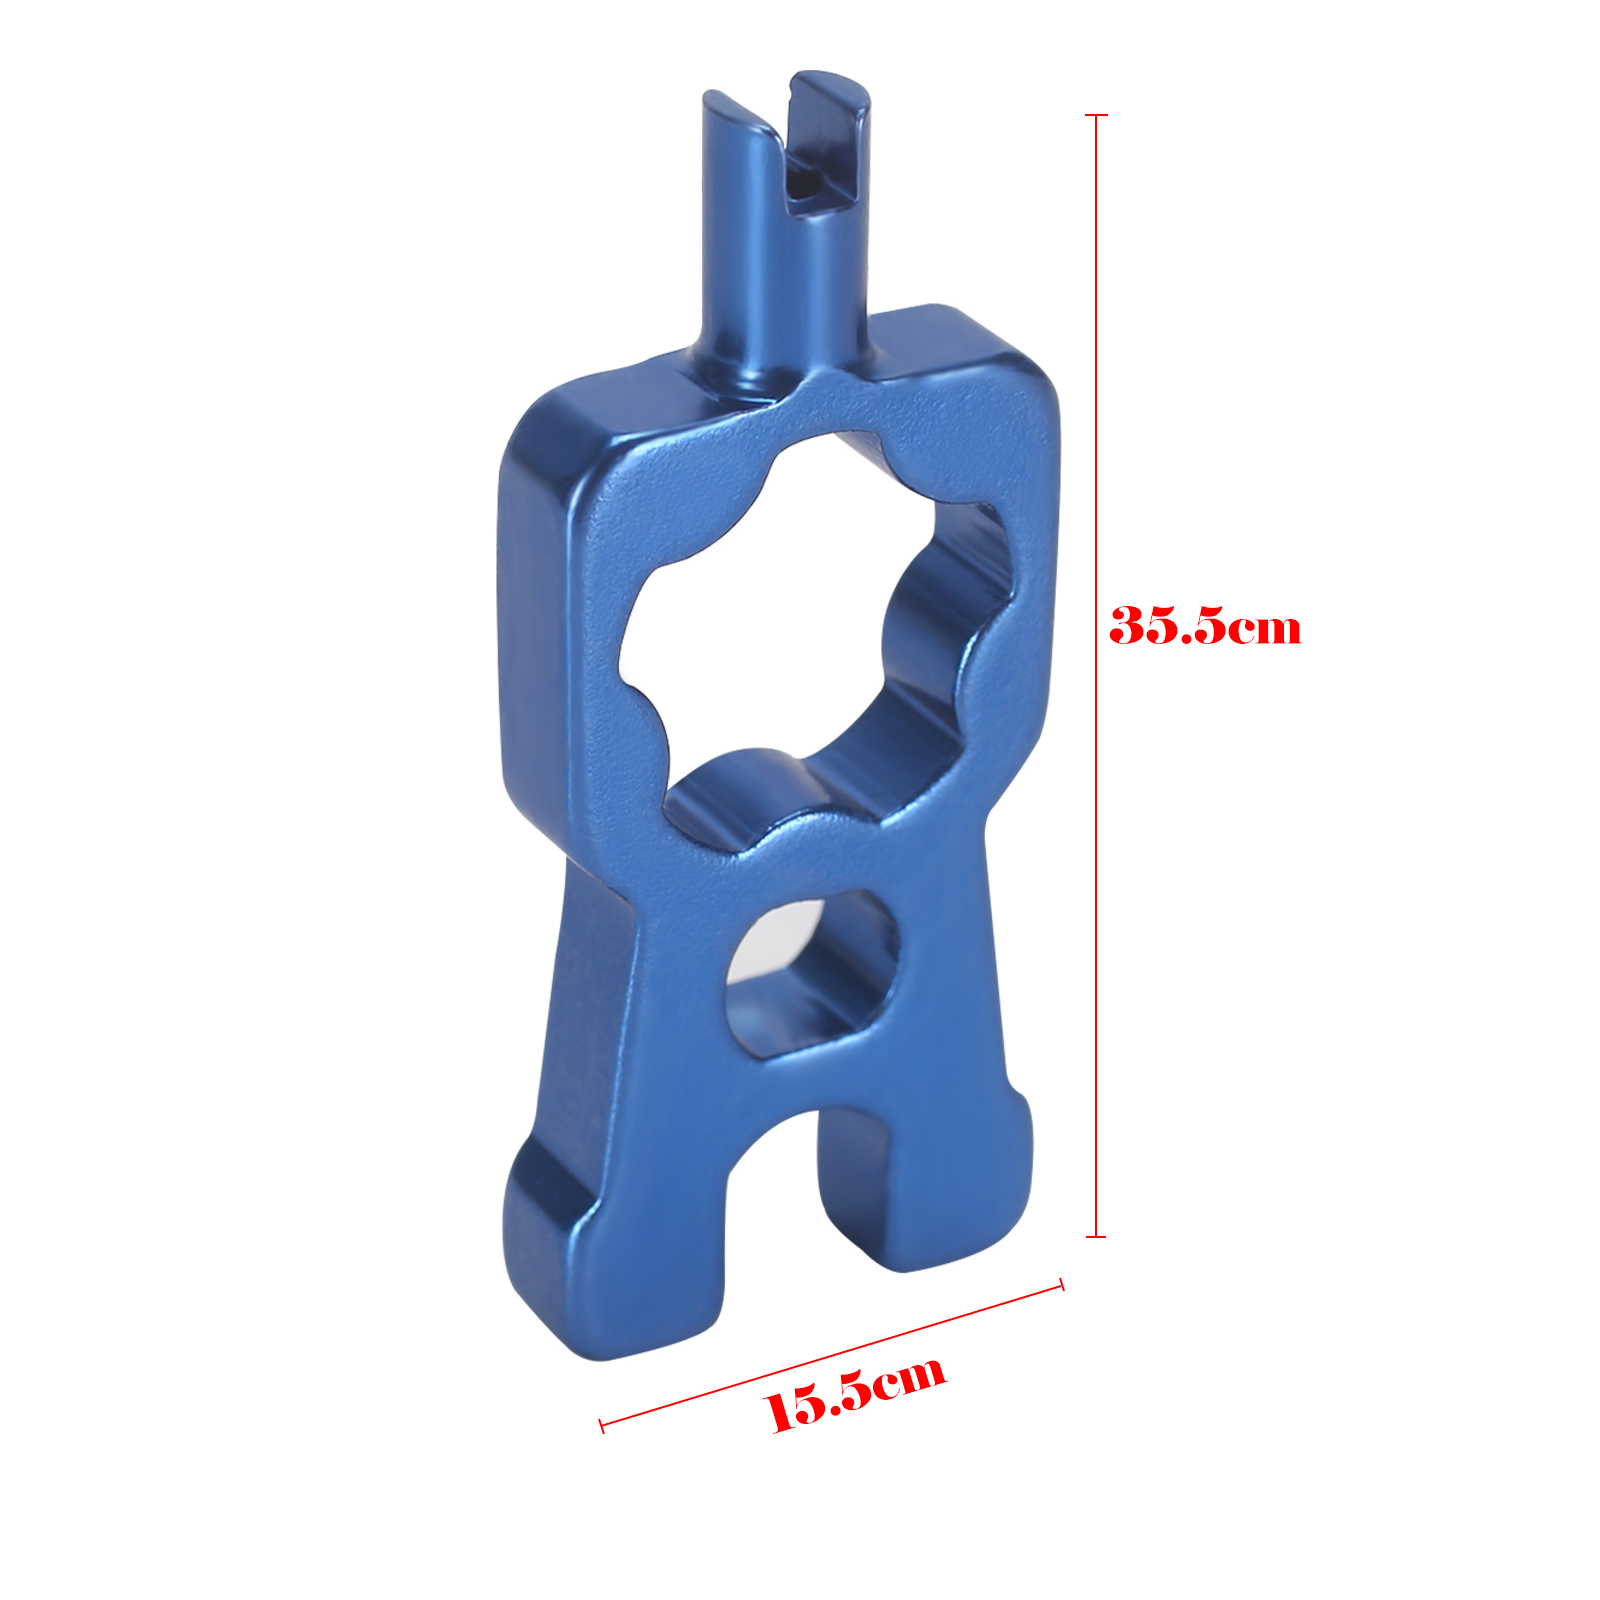 RISK 4 IN 1 Bike Valve Tools Wrench MTB Road Bicycle Valve Removal Installation Tool Portable Presta Valve Core Repair Tools